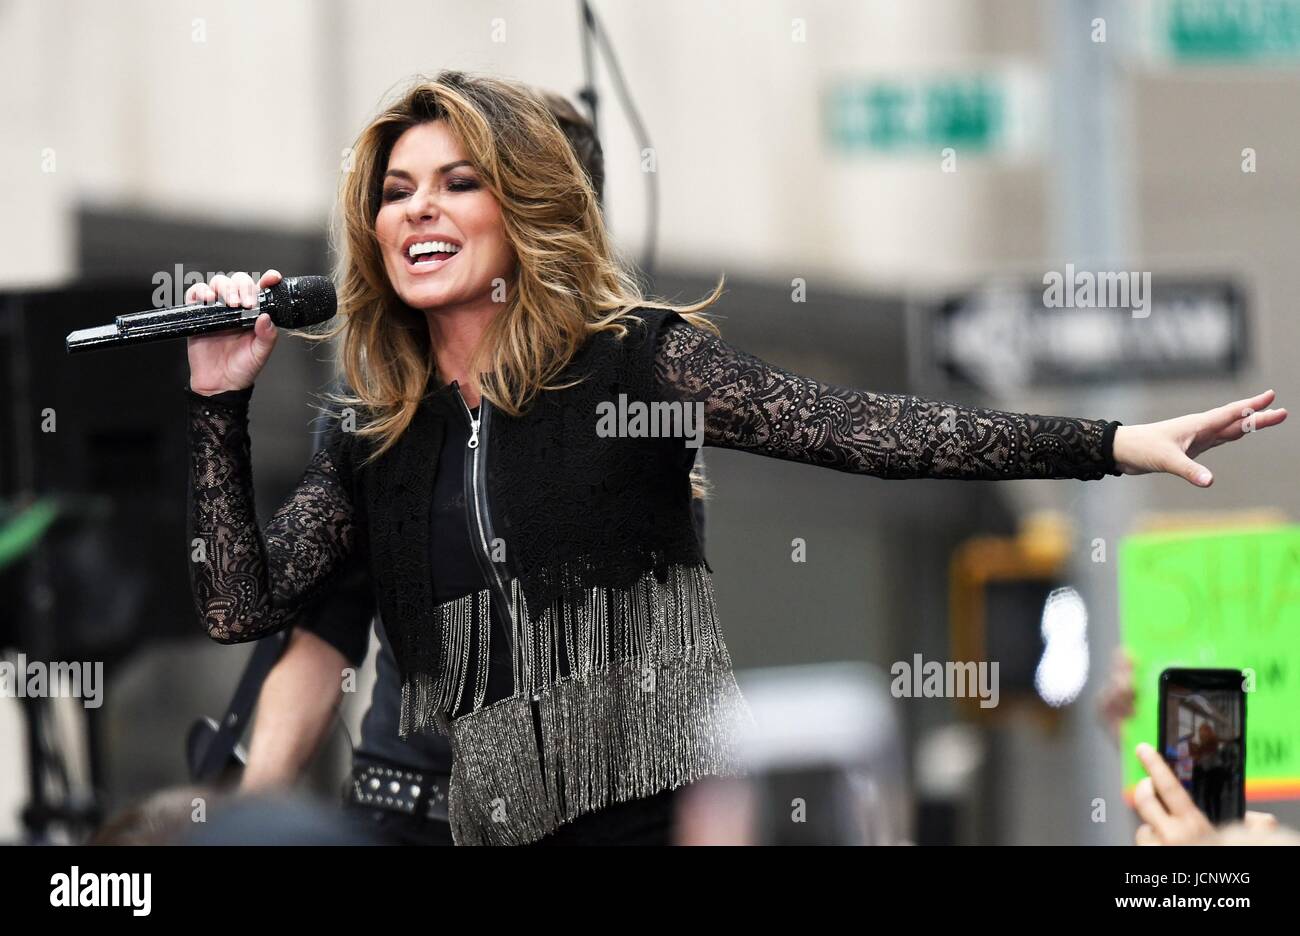 New York, NY, USA. 16th June, 2017. Shania Twain on stage for NBC Today Show Concert with Shania Twain, Rockefeller Plaza, New York, NY June 16, 2017. Credit: Lee/Everett Collection/Alamy Live News Stock Photo